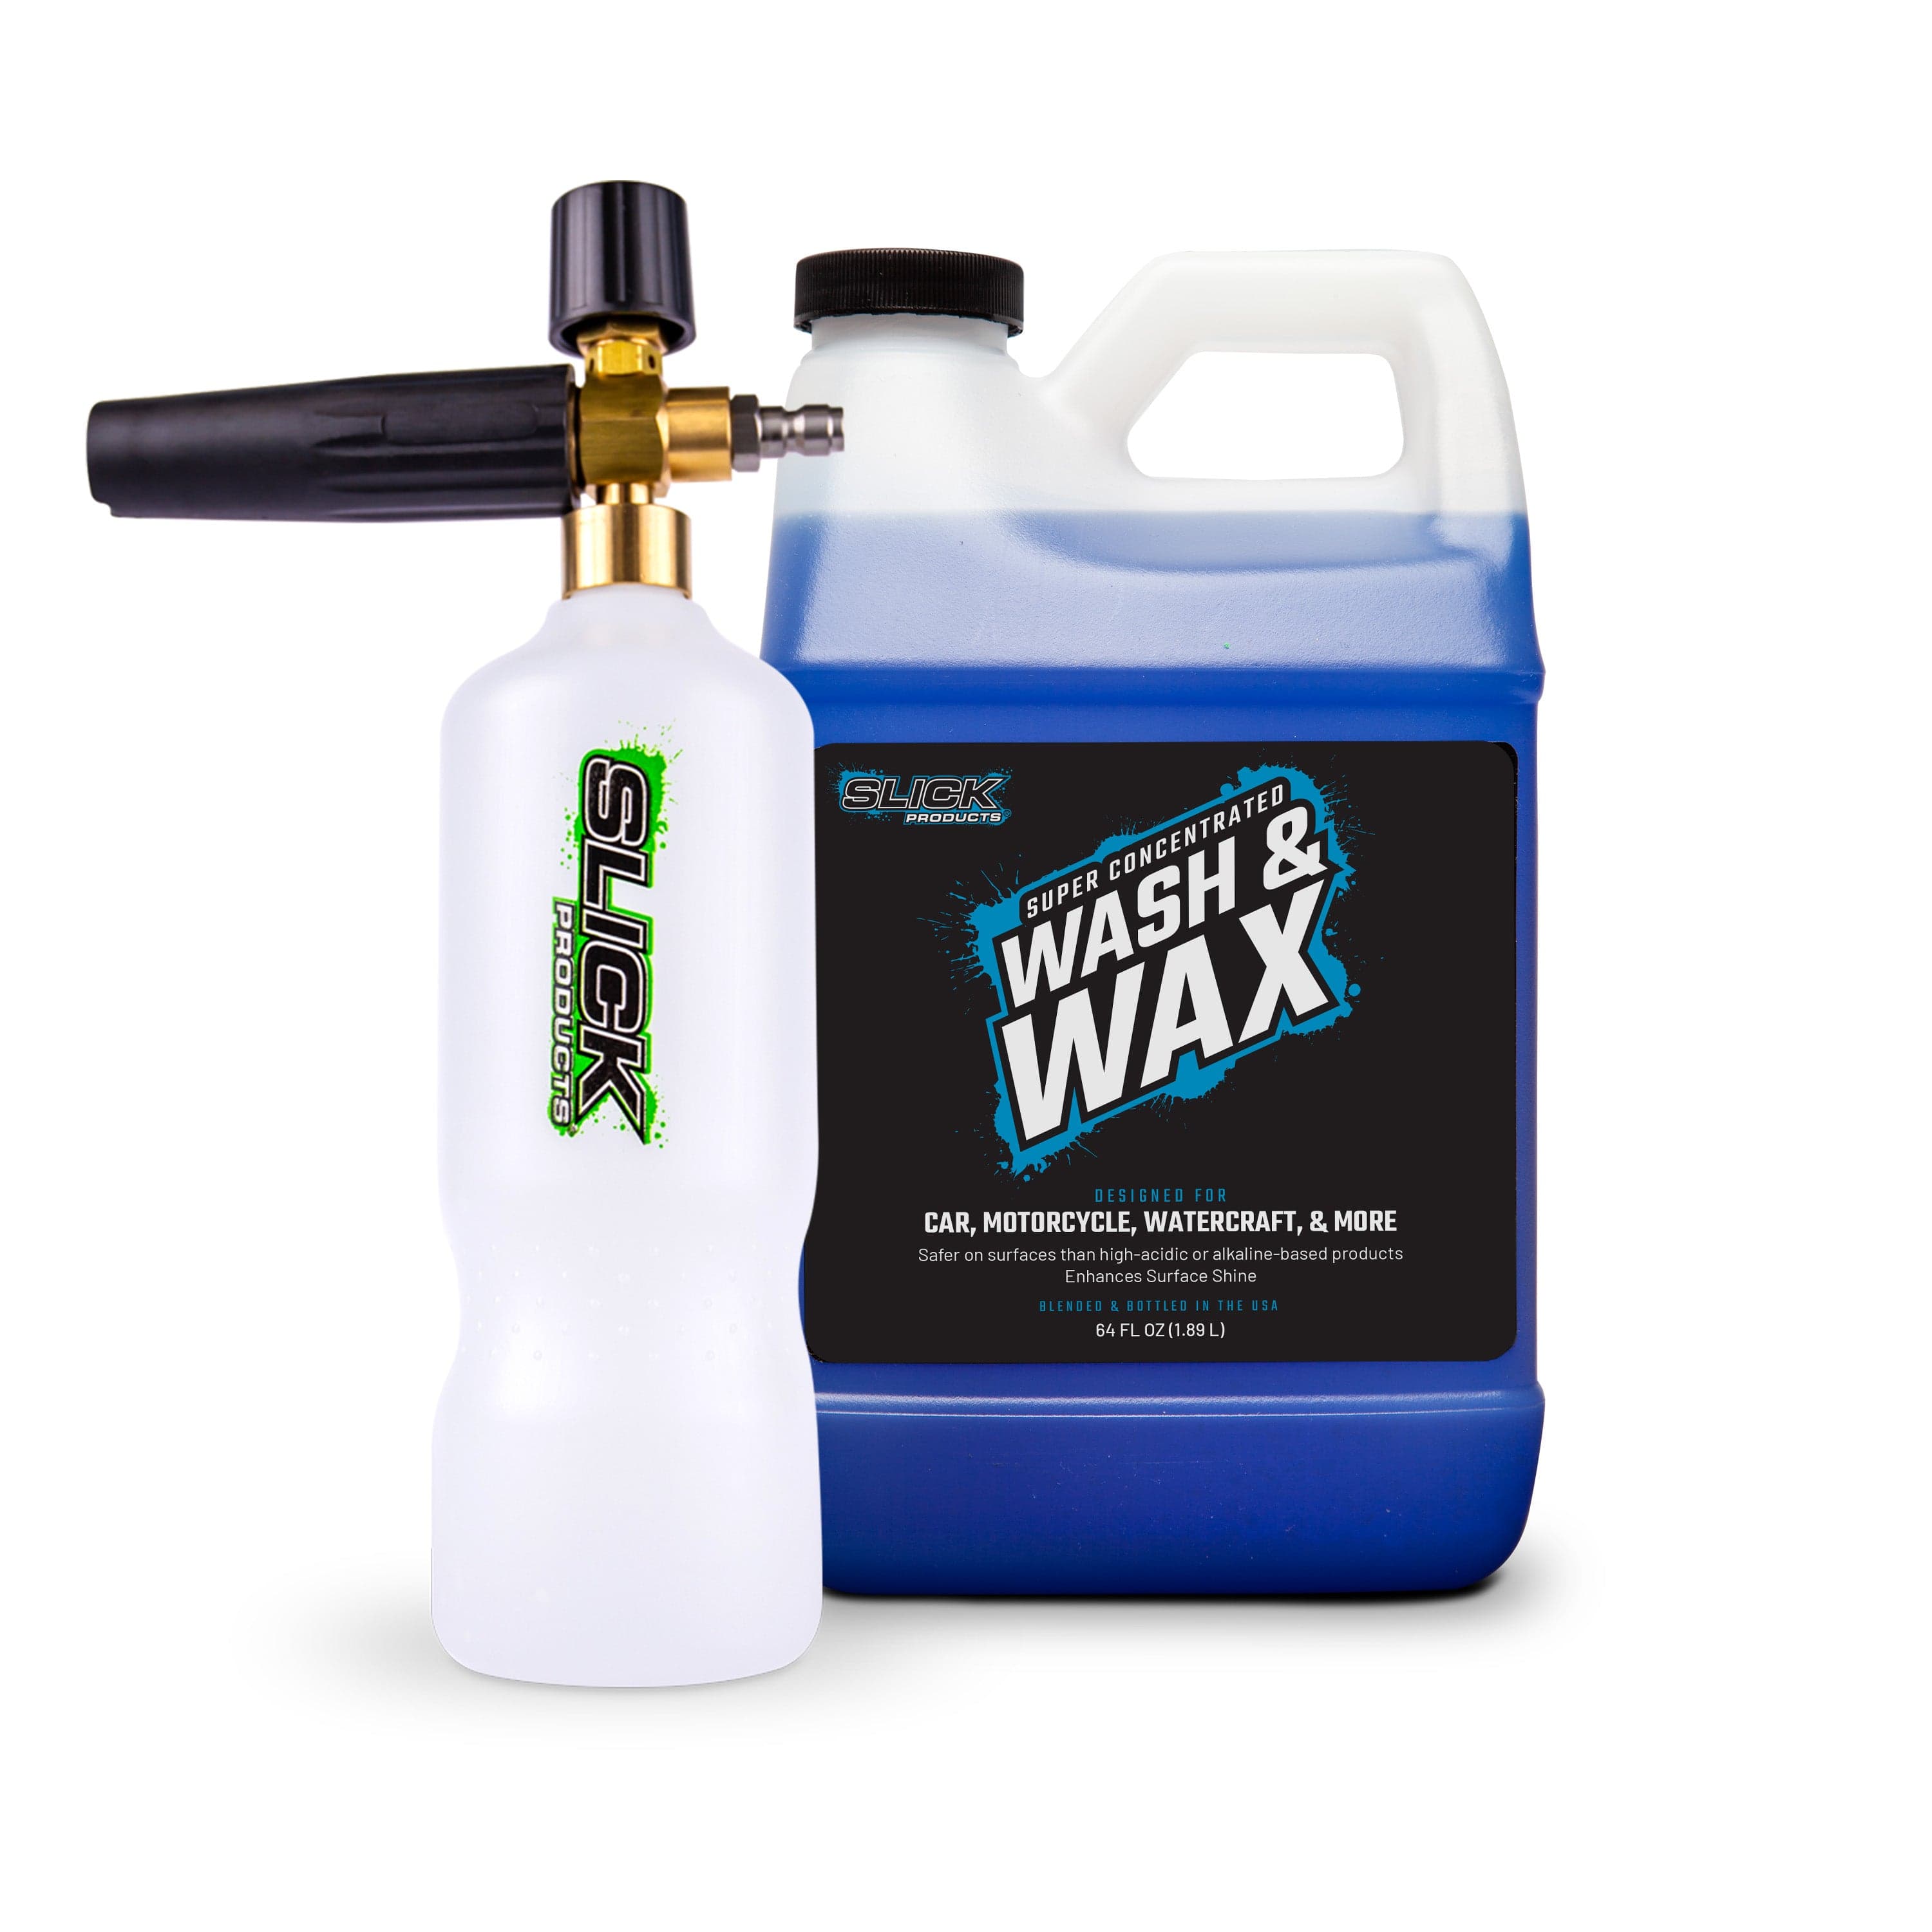 Free Foam Cannon Special Offer